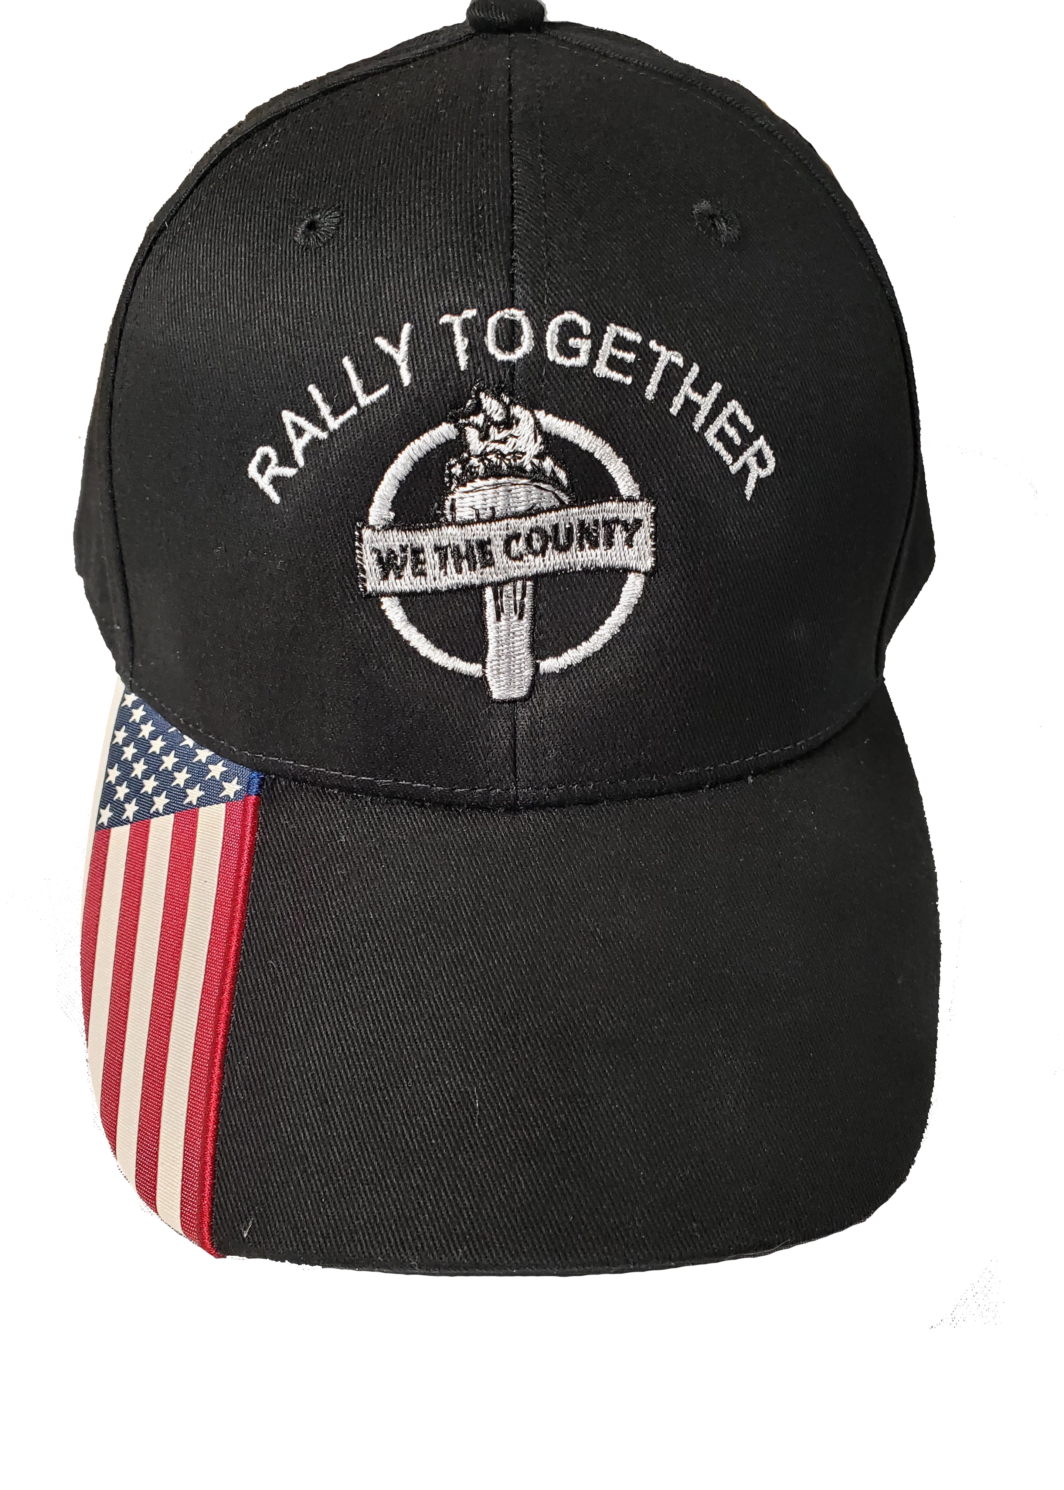 We The County Embroidered Hat